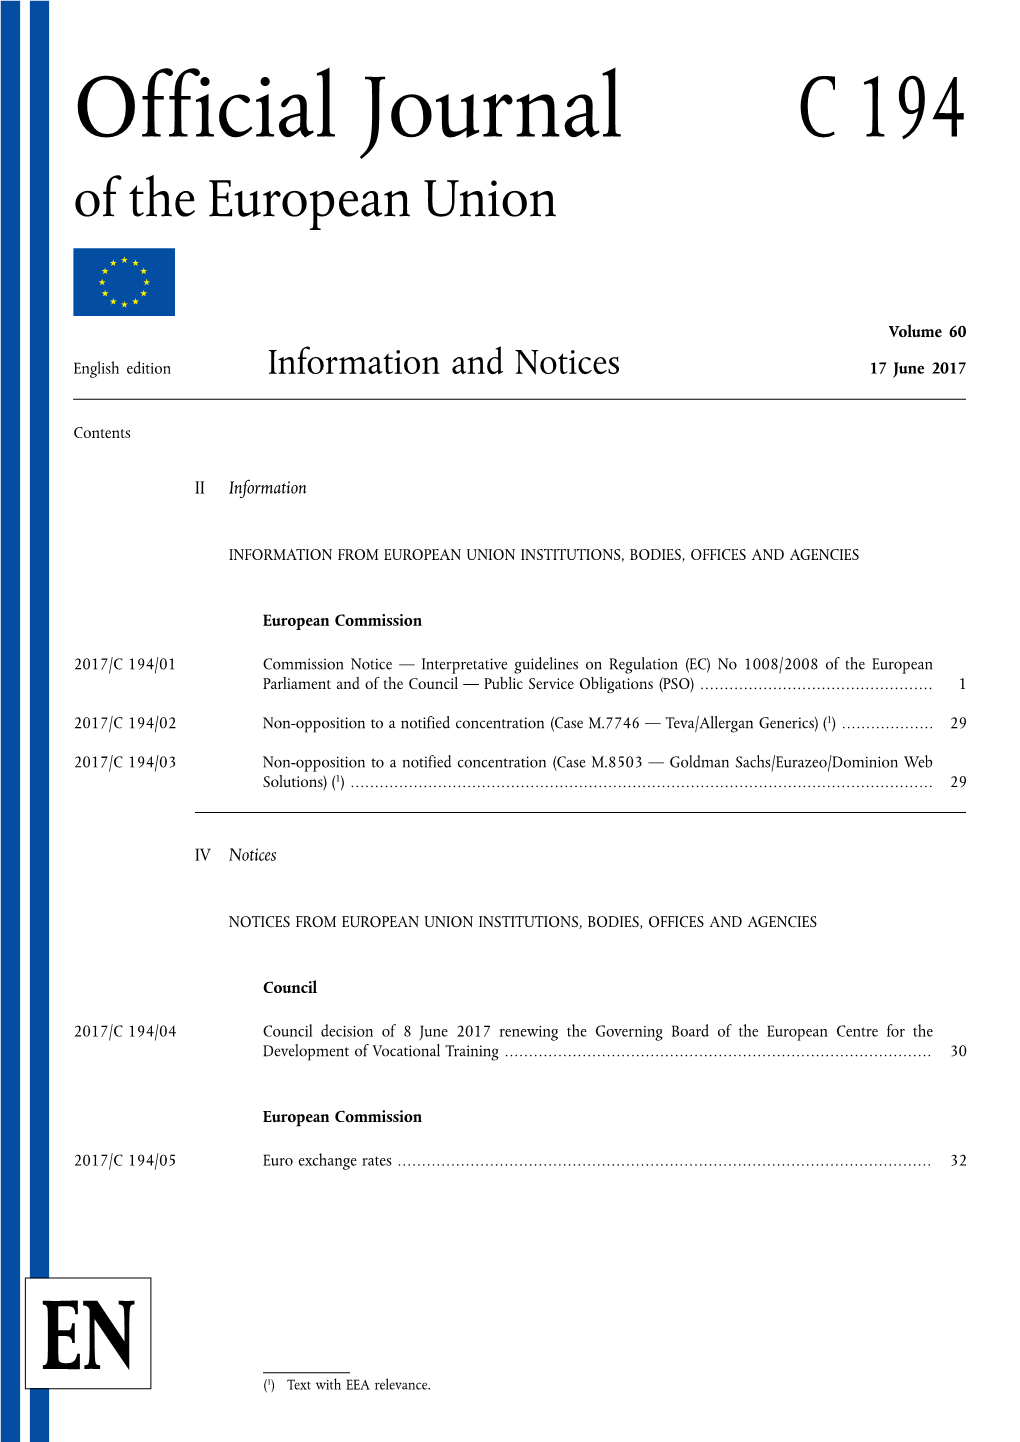 Official Journal C 194 of the European Union